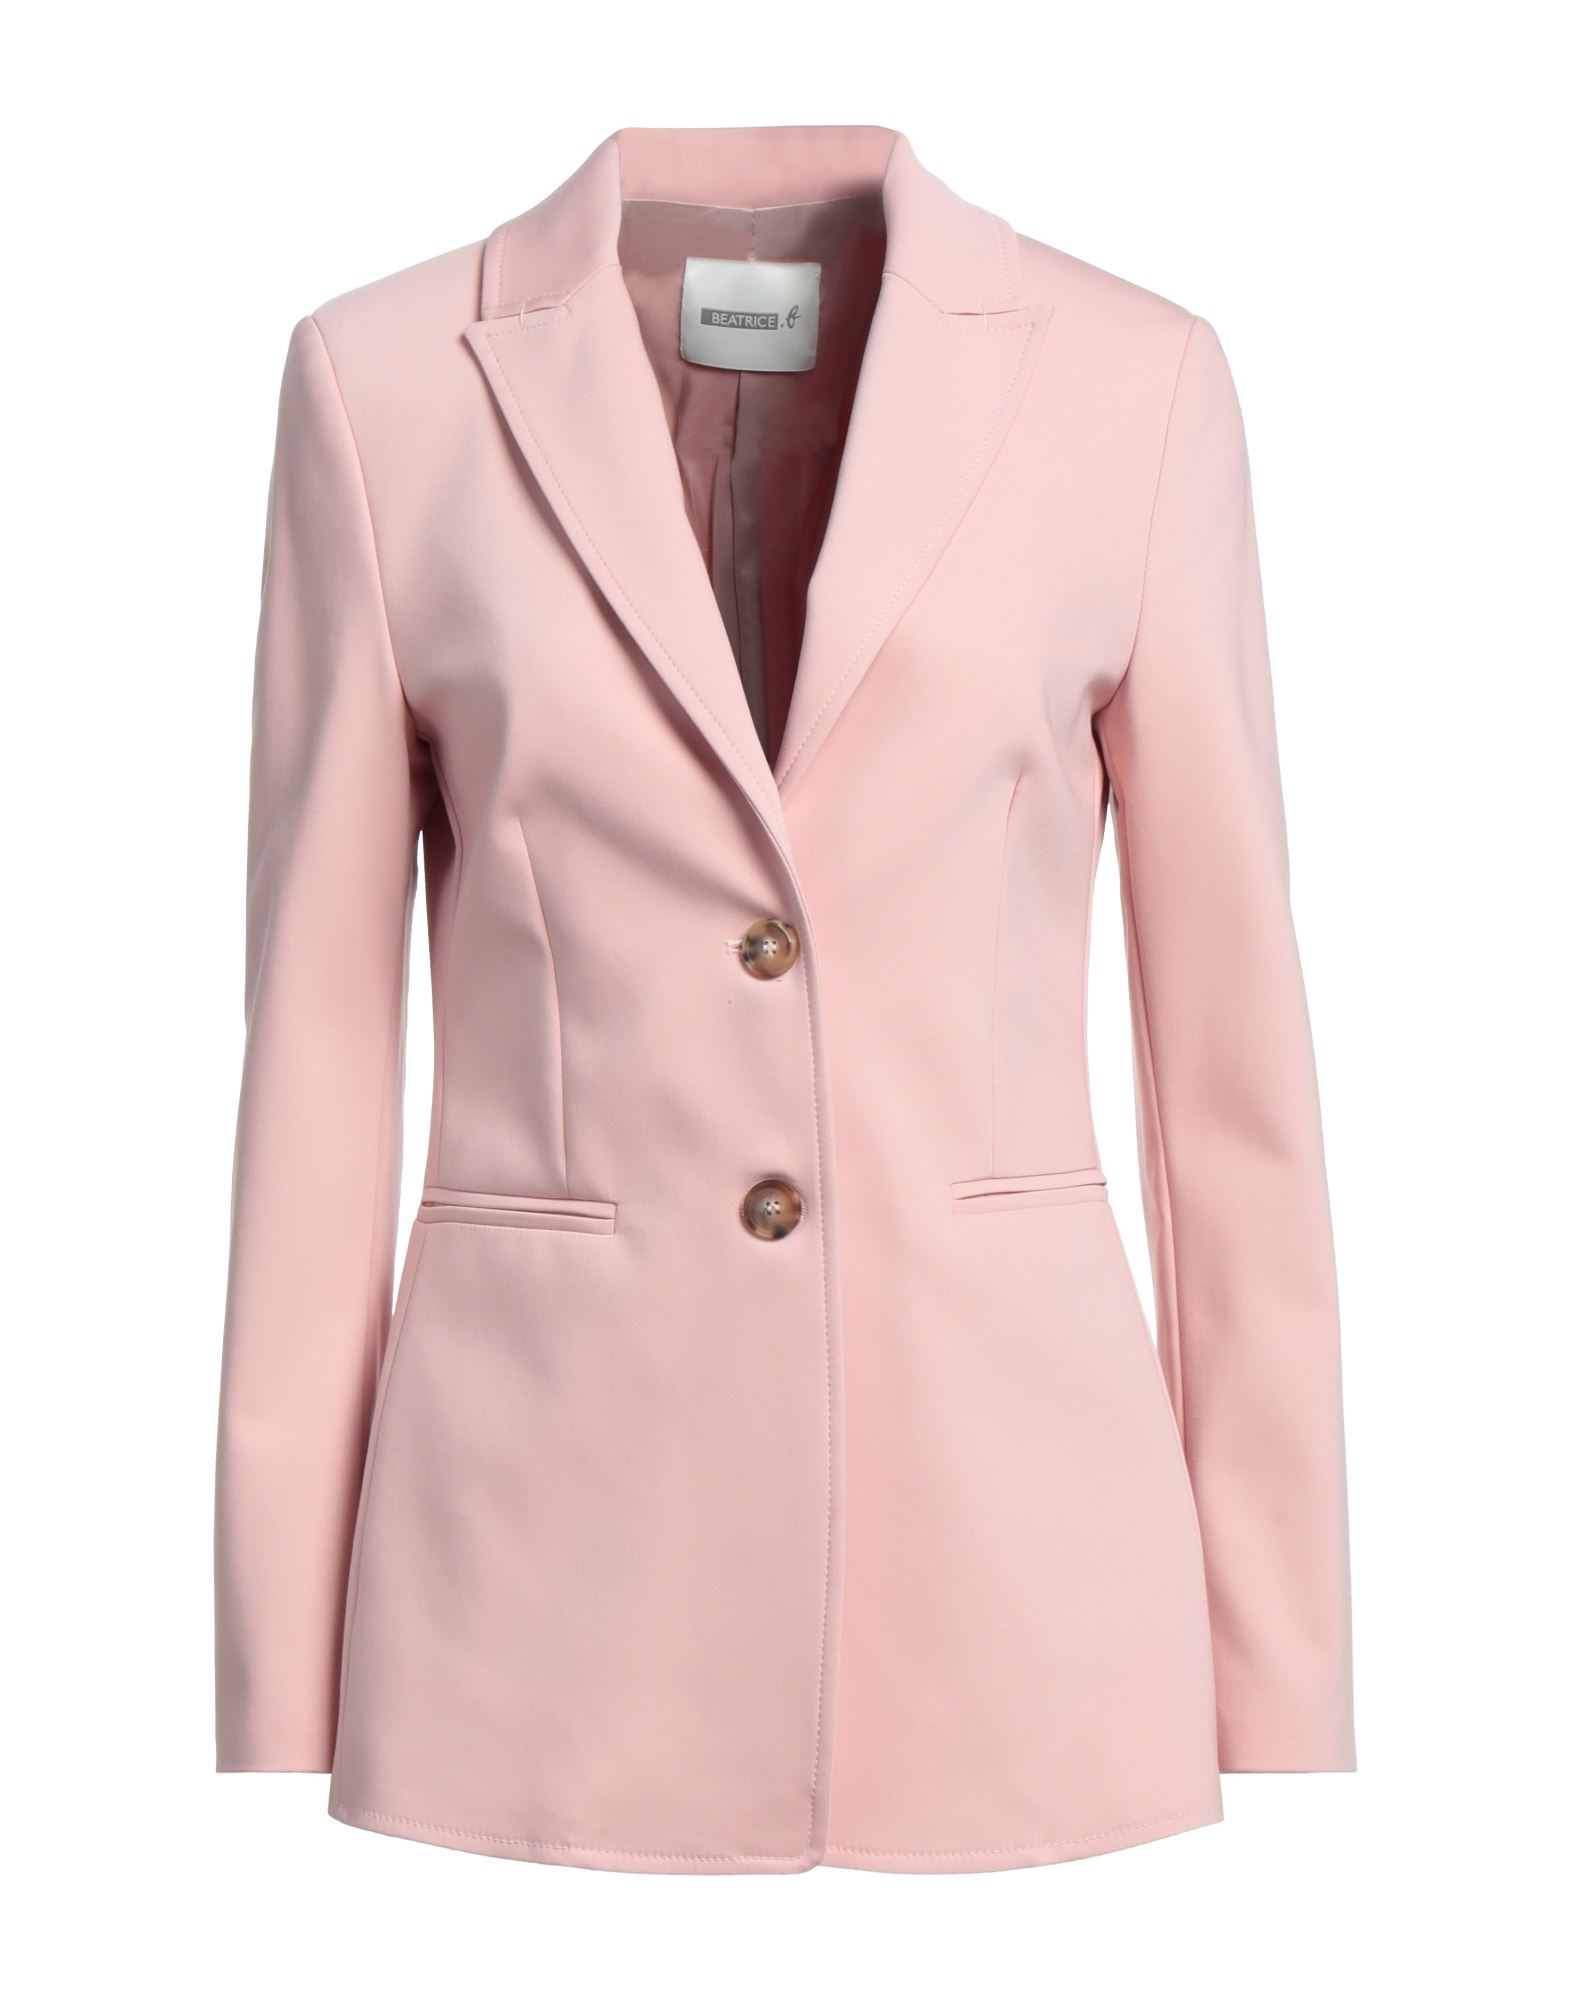 Beatrice B Beatrice.b Suit Jackets In Pink